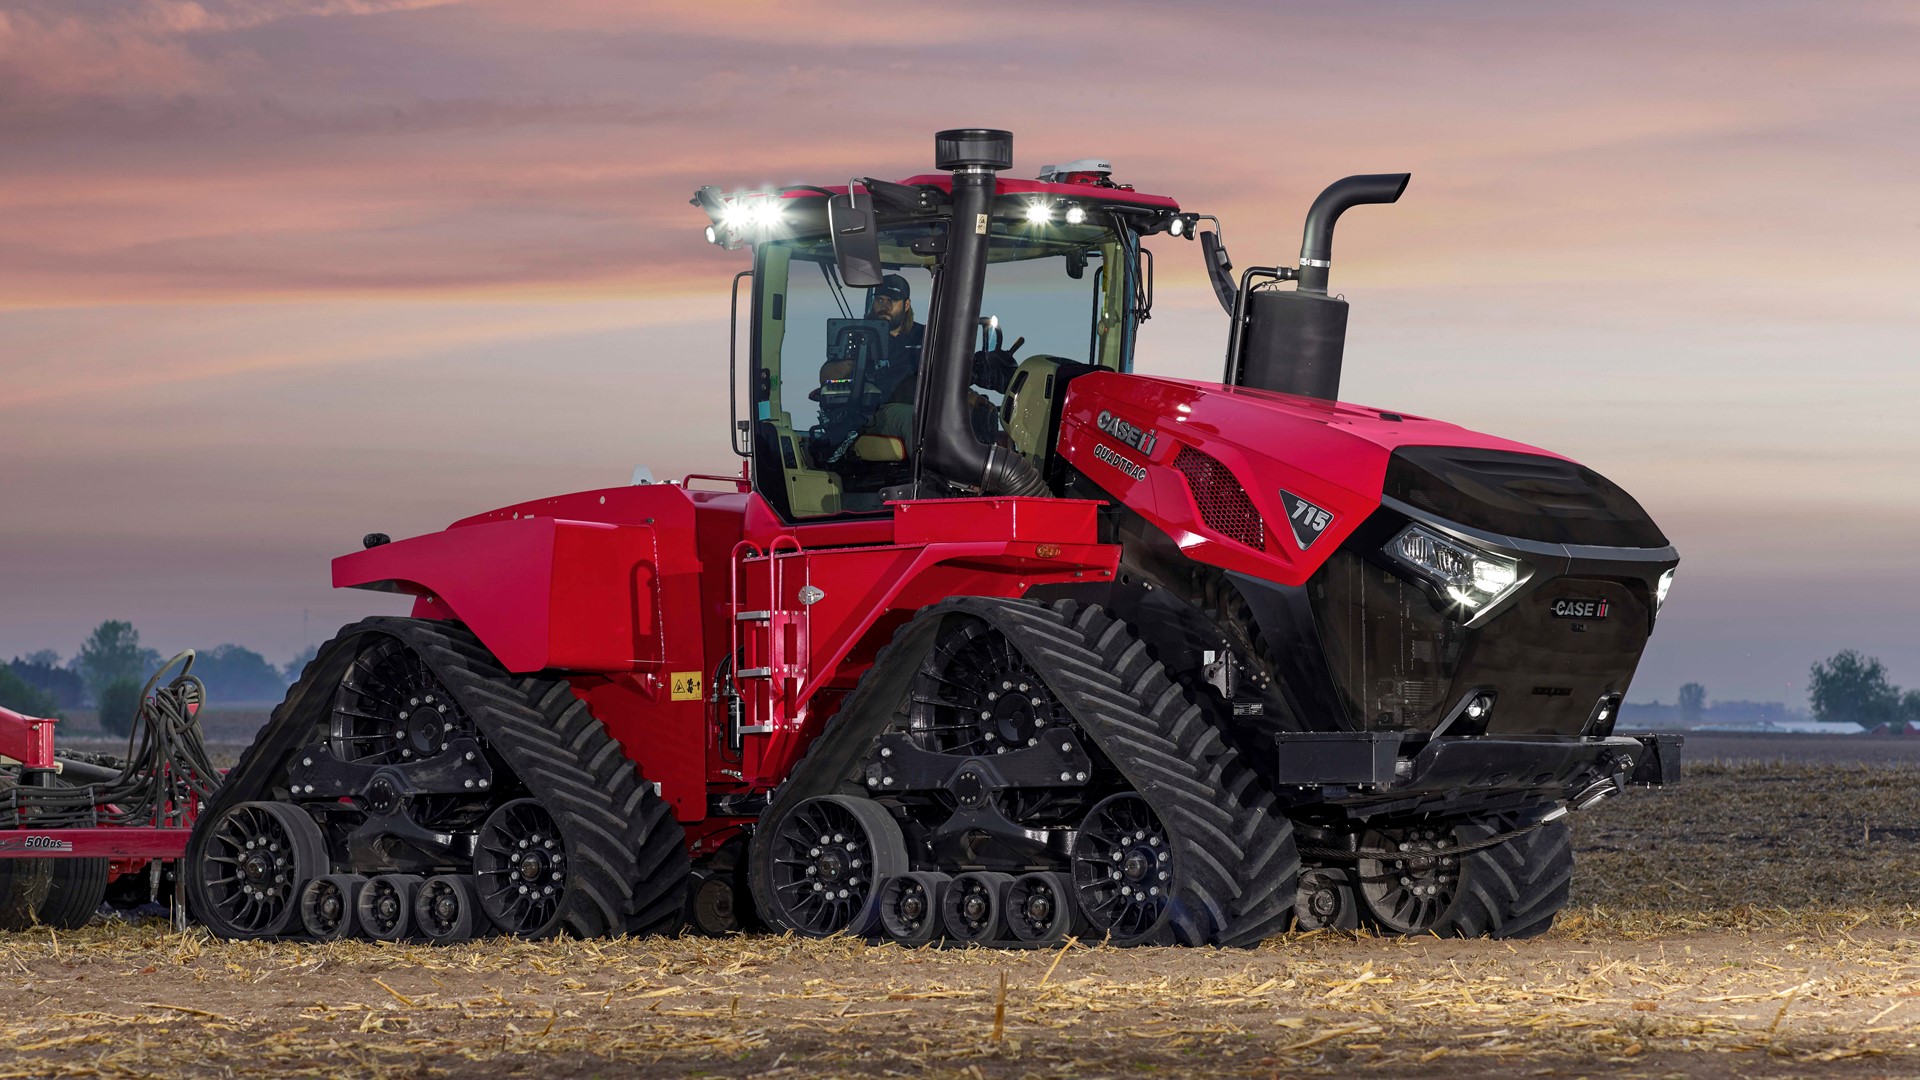 Case IH Announces New Tractor Innovations, Product Expansions That